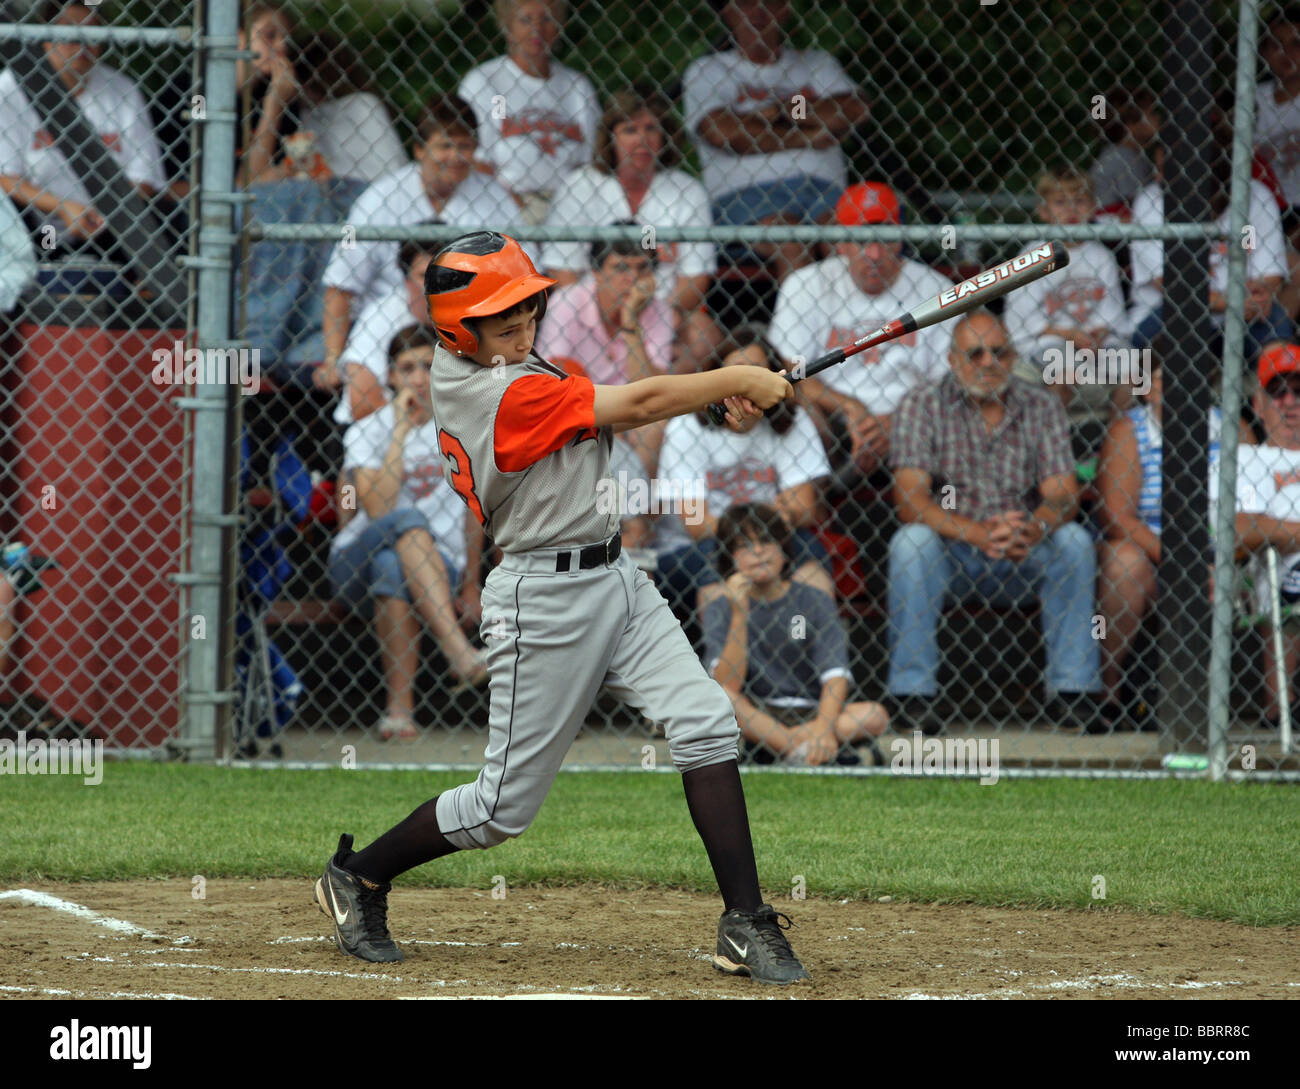 A little league baseball player makes a hit during a summer league game in Connecticut USA Stock Photo